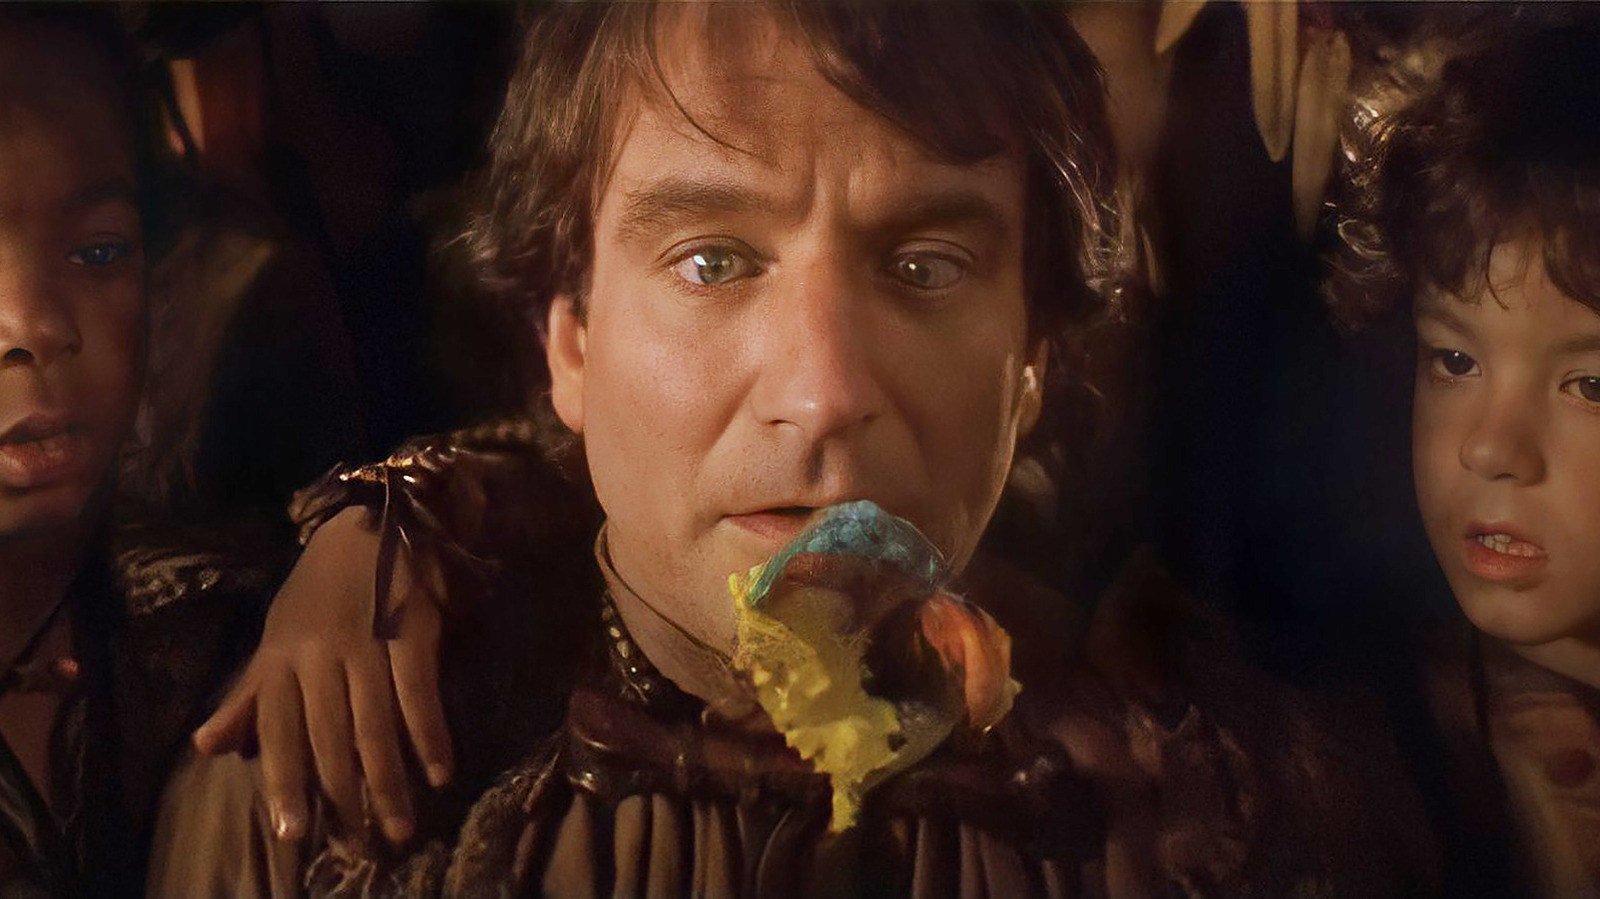 Robin Williams as Peter Pan staring hungrily at a spoon with imaginary food all over it